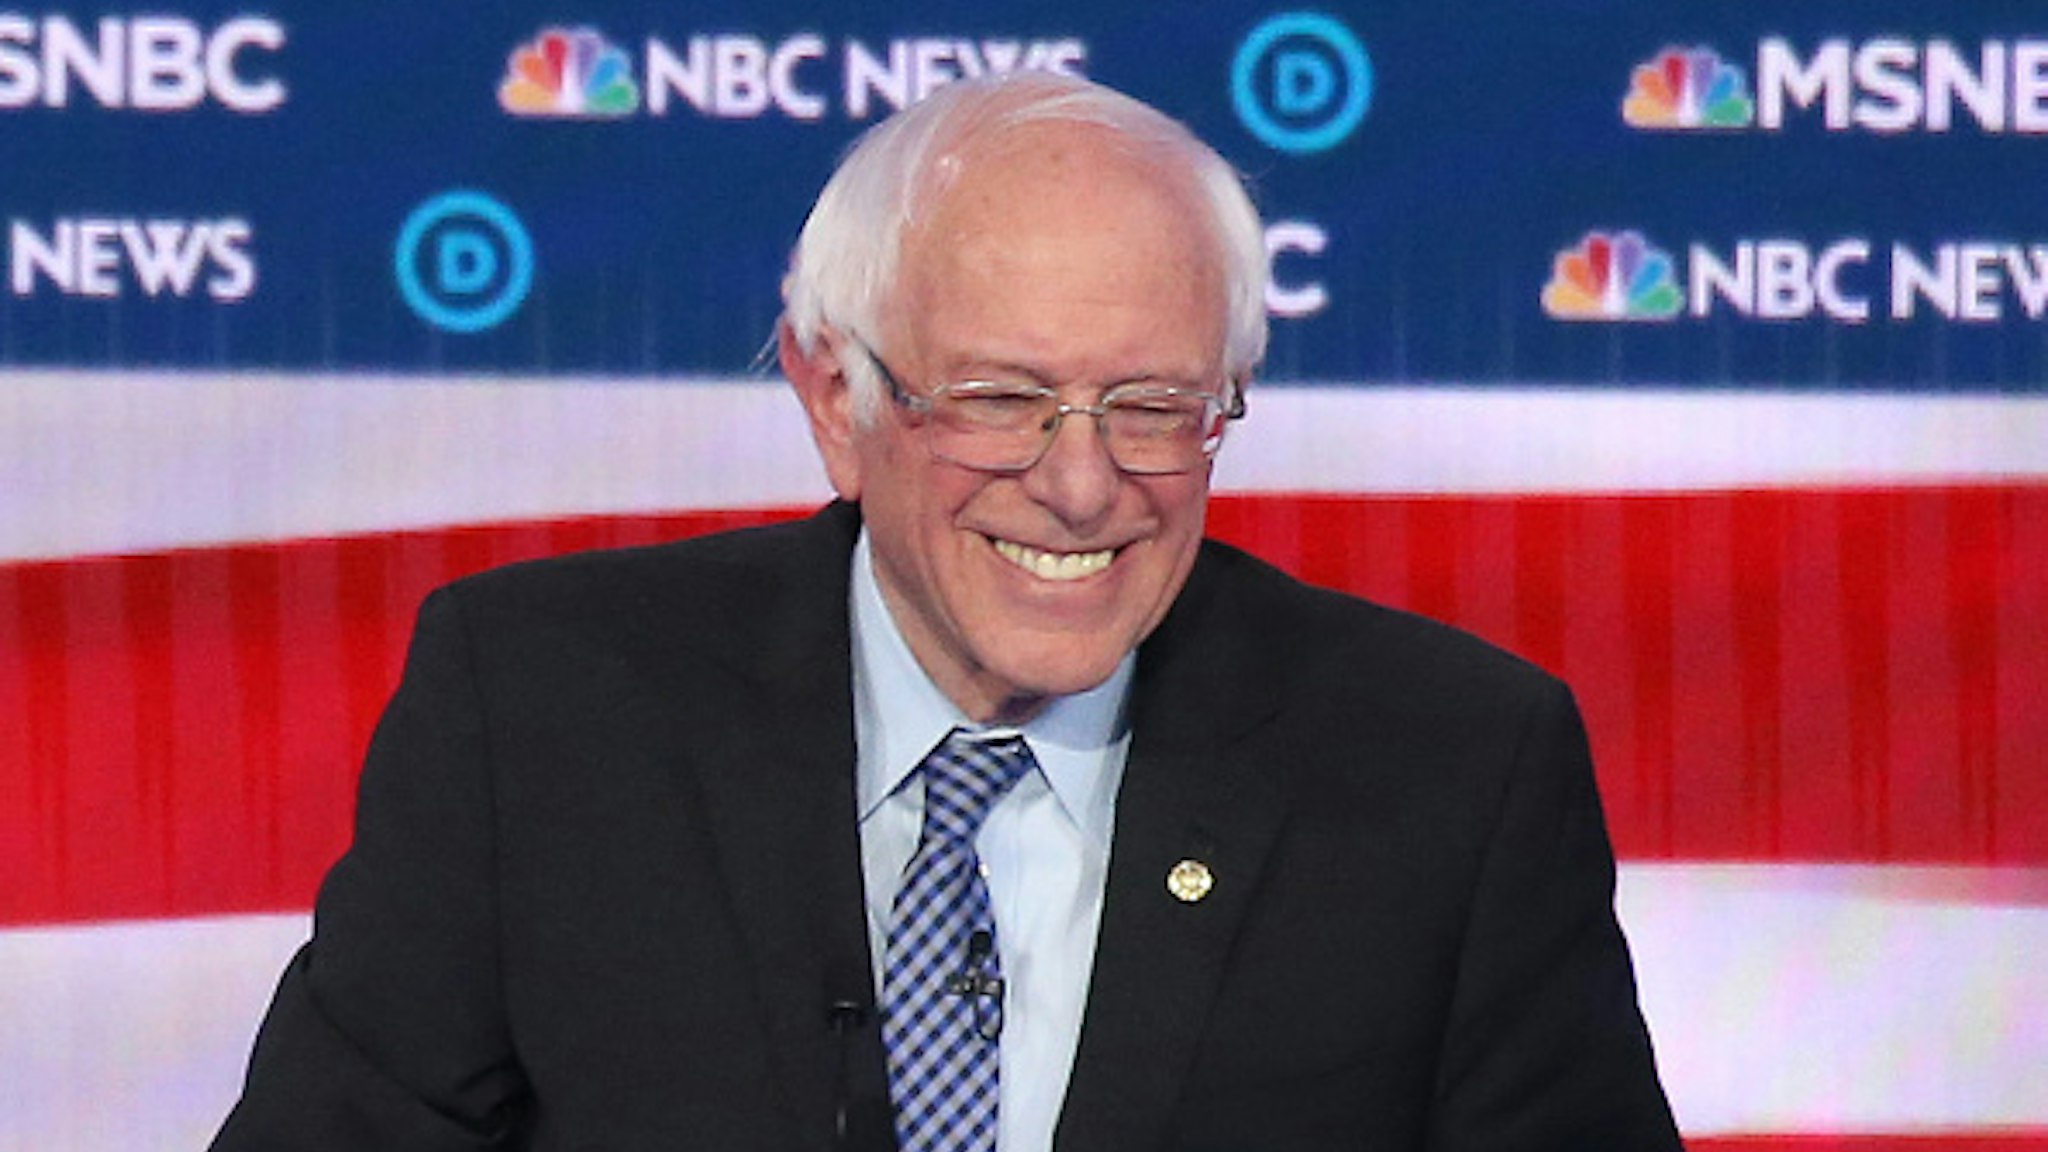 LAS VEGAS, NEVADA - FEBRUARY 19: Democratic presidential candidate Sen. Bernie Sanders (I-VT) smiles during the Democratic presidential primary debate at Paris Las Vegas on February 19, 2020 in Las Vegas, Nevada. Six candidates qualified for the third Democratic presidential primary debate of 2020, which comes just days before the Nevada caucuses on February 22.